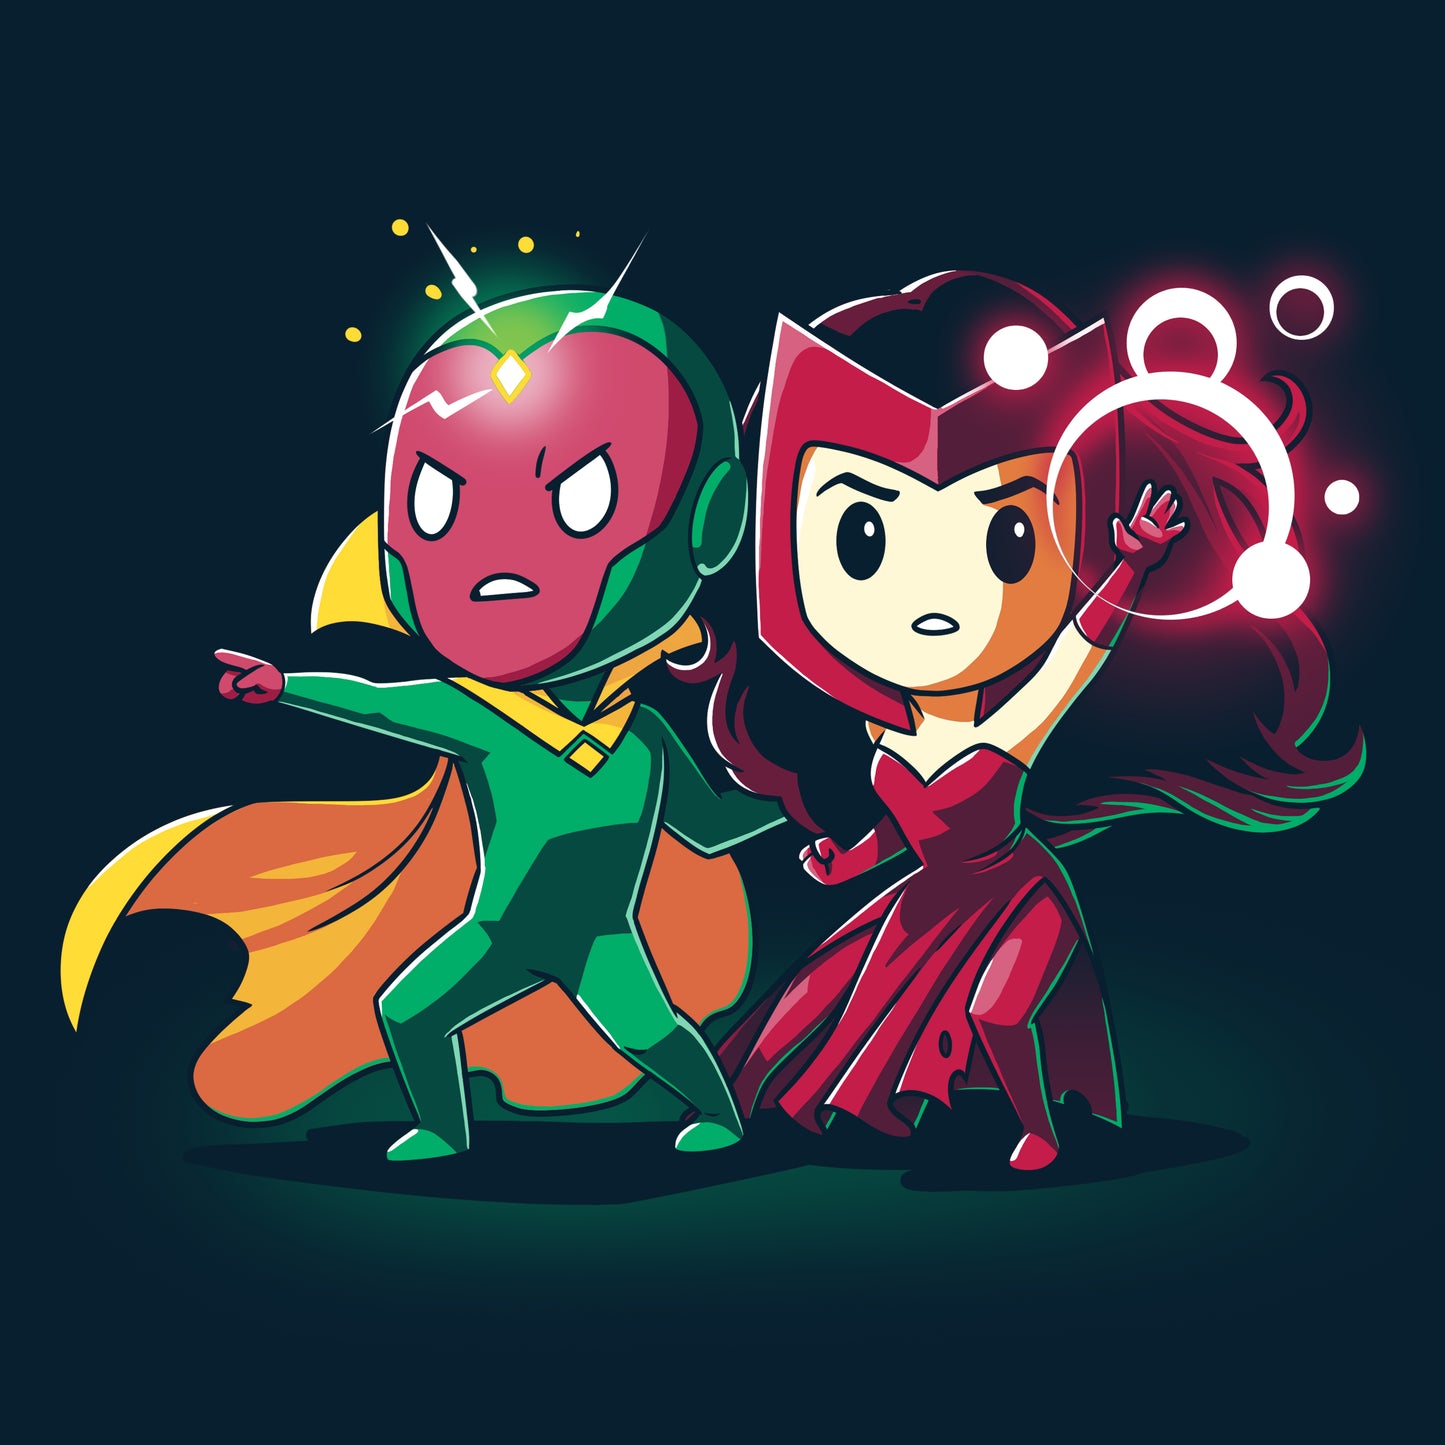 Two Marvel superheroes, Vision and Scarlet Witch, standing together wearing Marvel T-shirts.